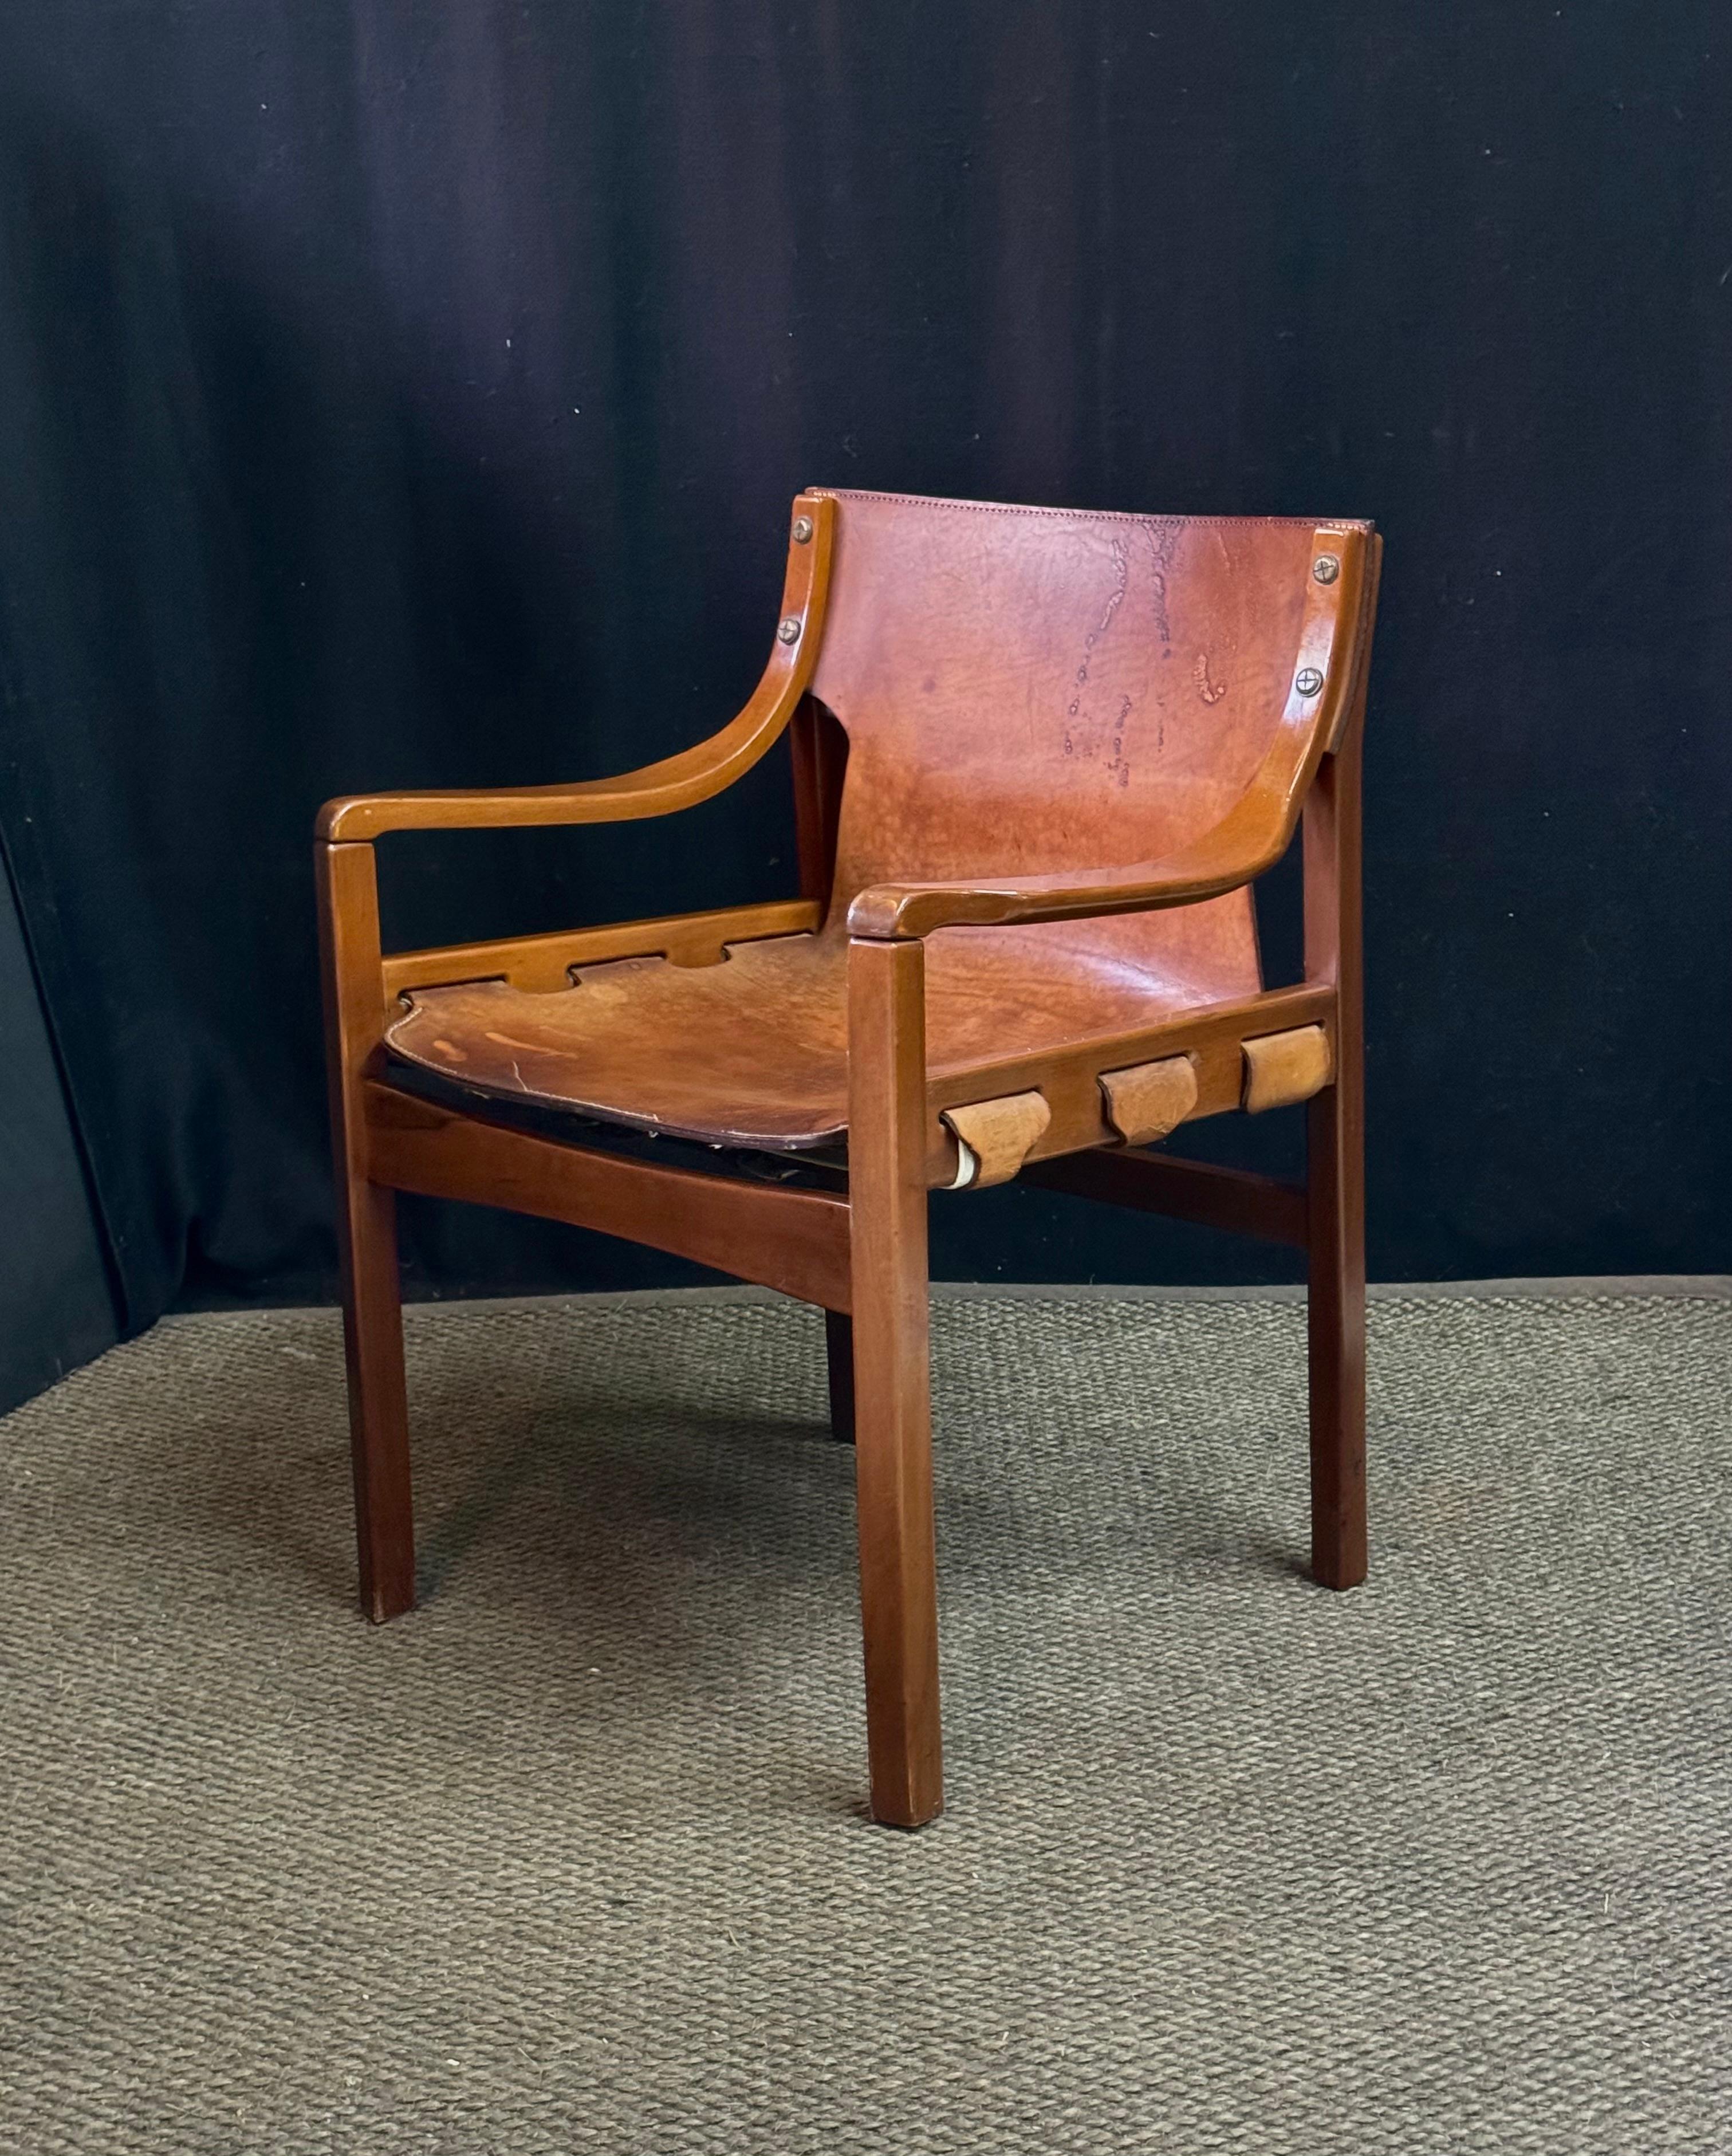 Mid Century armchair by prolific Brazilian architect and furniture designer, Sergio Rodrigues (1924-2014), having the original natural leather suspension seat held by a walnut frame with bentwood arms. Known for his stylish yet comfortable seating,